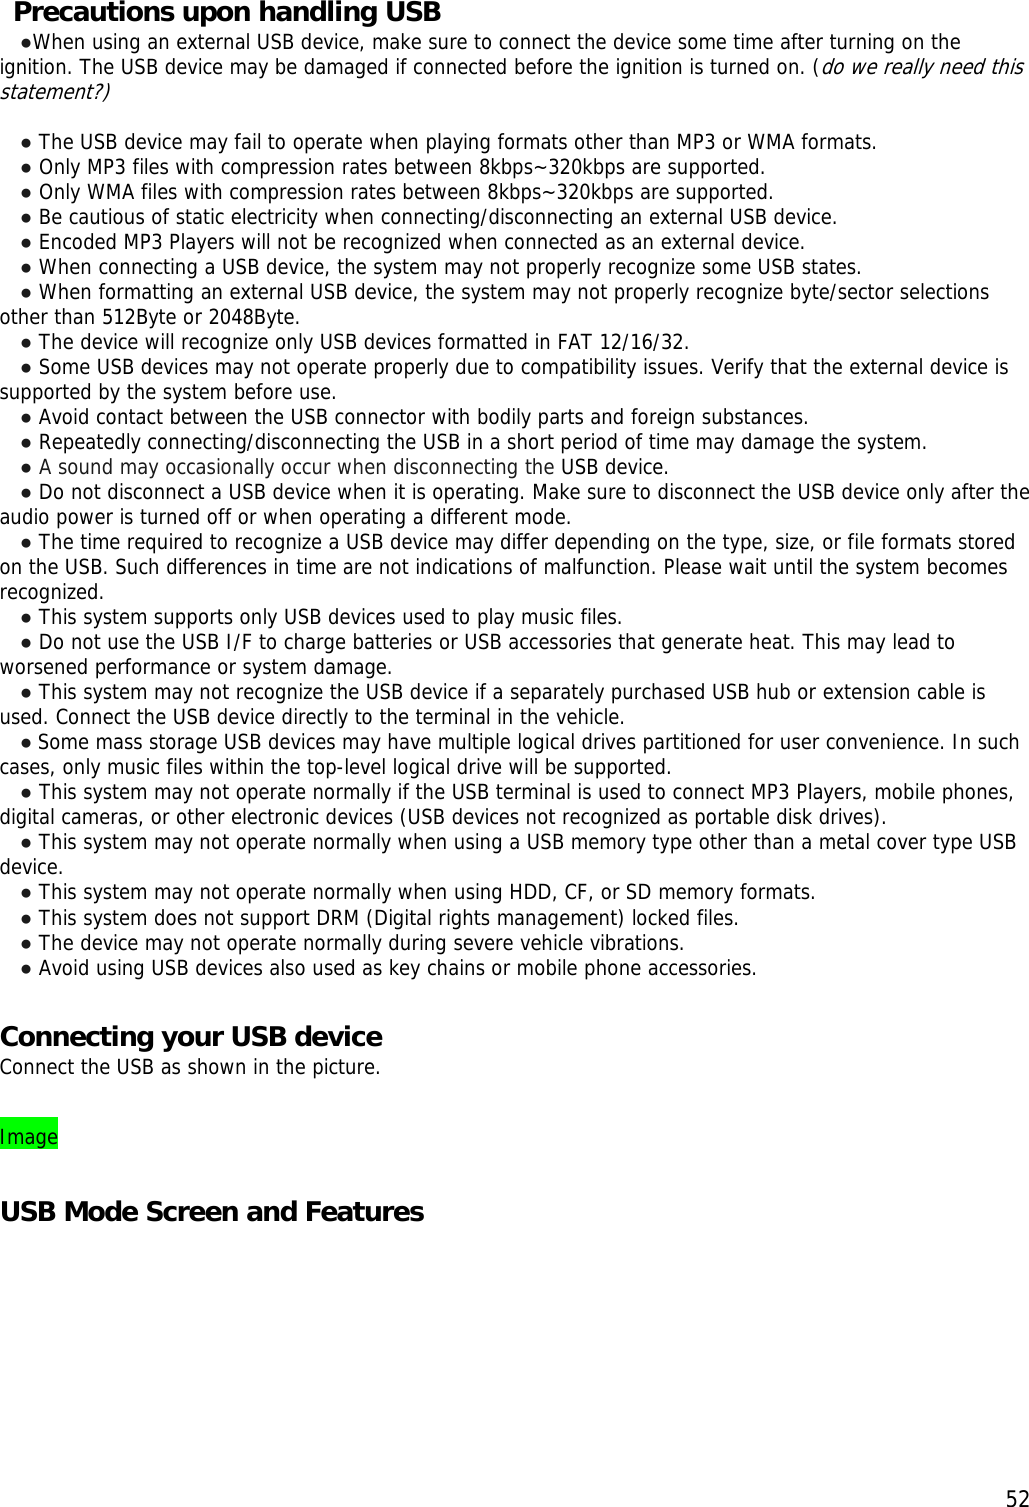  52 Precautions upon handling USB ●When using an external USB device, make sure to connect the device some time after turning on the ignition. The USB device may be damaged if connected before the ignition is turned on. (do we really need this statement?)   ● The USB device may fail to operate when playing formats other than MP3 or WMA formats. ● Only MP3 files with compression rates between 8kbps~320kbps are supported. ● Only WMA files with compression rates between 8kbps~320kbps are supported. ● Be cautious of static electricity when connecting/disconnecting an external USB device. ● Encoded MP3 Players will not be recognized when connected as an external device. ● When connecting a USB device, the system may not properly recognize some USB states. ● When formatting an external USB device, the system may not properly recognize byte/sector selections other than 512Byte or 2048Byte. ● The device will recognize only USB devices formatted in FAT 12/16/32. ● Some USB devices may not operate properly due to compatibility issues. Verify that the external device is supported by the system before use. ● Avoid contact between the USB connector with bodily parts and foreign substances. ● Repeatedly connecting/disconnecting the USB in a short period of time may damage the system. ● A sound may occasionally occur when disconnecting the USB device. ● Do not disconnect a USB device when it is operating. Make sure to disconnect the USB device only after the audio power is turned off or when operating a different mode.  ● The time required to recognize a USB device may differ depending on the type, size, or file formats stored on the USB. Such differences in time are not indications of malfunction. Please wait until the system becomes recognized. ● This system supports only USB devices used to play music files. ● Do not use the USB I/F to charge batteries or USB accessories that generate heat. This may lead to worsened performance or system damage. ● This system may not recognize the USB device if a separately purchased USB hub or extension cable is used. Connect the USB device directly to the terminal in the vehicle. ● Some mass storage USB devices may have multiple logical drives partitioned for user convenience. In such cases, only music files within the top-level logical drive will be supported.  ● This system may not operate normally if the USB terminal is used to connect MP3 Players, mobile phones, digital cameras, or other electronic devices (USB devices not recognized as portable disk drives). ● This system may not operate normally when using a USB memory type other than a metal cover type USB device. ● This system may not operate normally when using HDD, CF, or SD memory formats. ● This system does not support DRM (Digital rights management) locked files. ● The device may not operate normally during severe vehicle vibrations.  ● Avoid using USB devices also used as key chains or mobile phone accessories.   Connecting your USB device Connect the USB as shown in the picture.  Image  USB Mode Screen and Features 